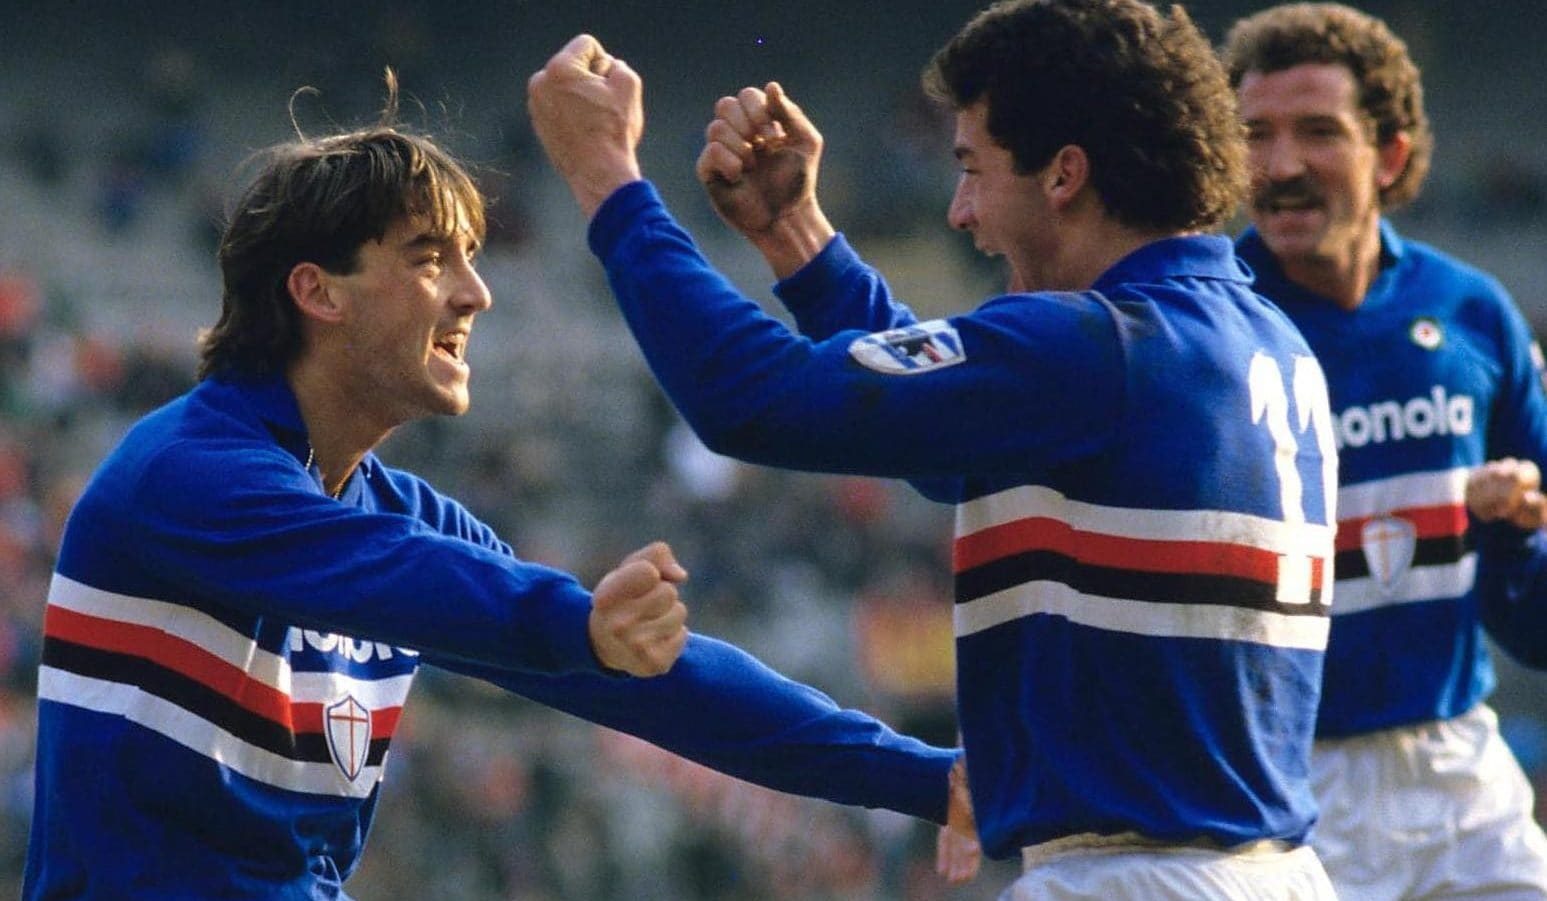 Behind Roberto Mancini’s Euro 2020 triumph at the helm of Italy, lies the story of a golden generation of Sampdoria players